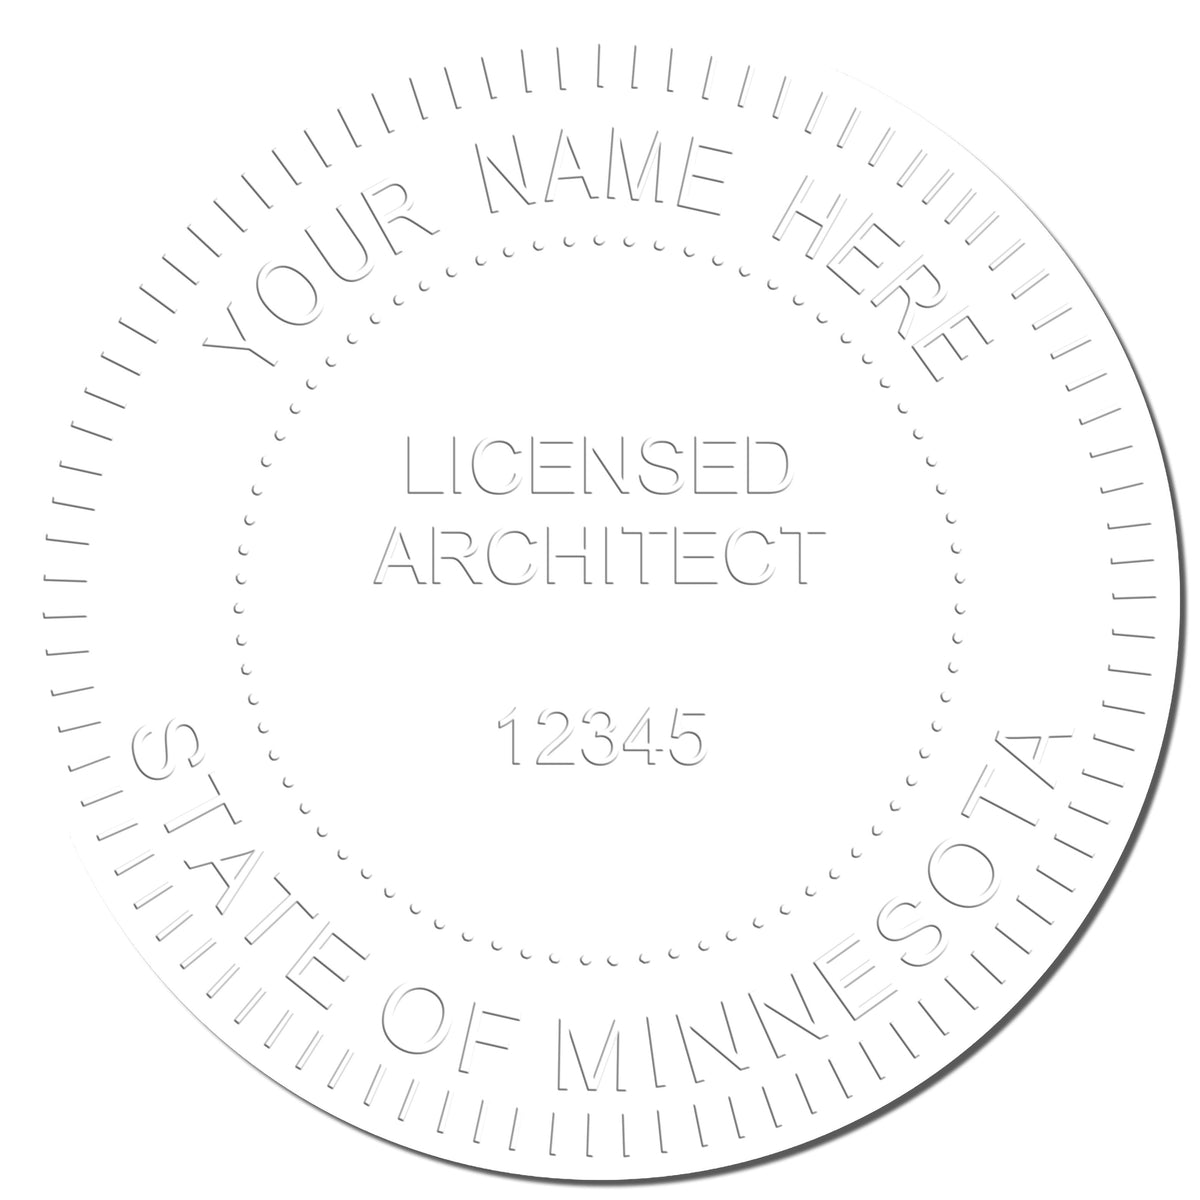 This paper is stamped with a sample imprint of the Gift Minnesota Architect Seal, signifying its quality and reliability.